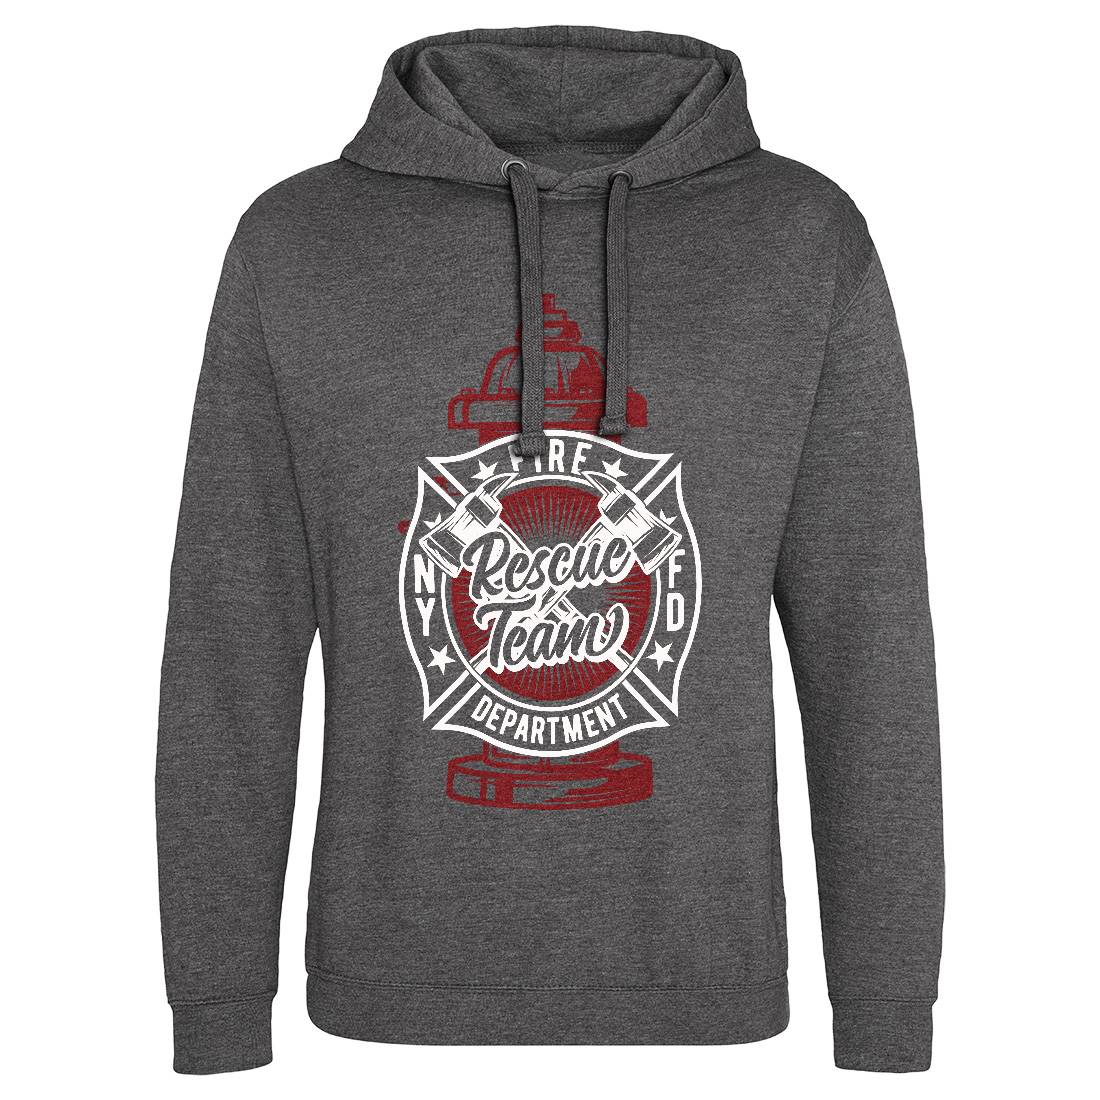 Fire Fighter Mens Hoodie Without Pocket Firefighters B817